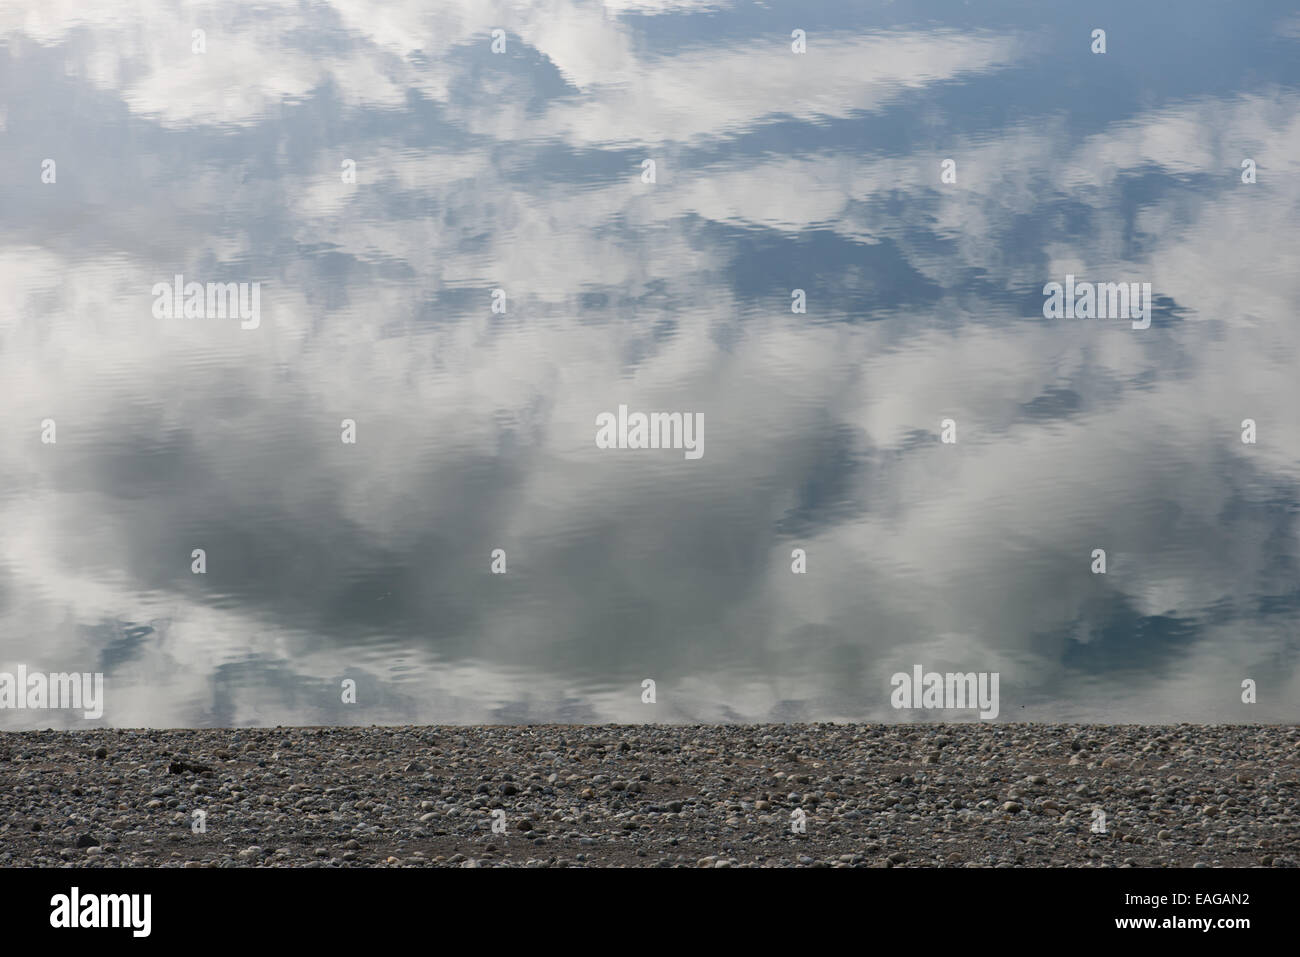 Delirium Heavy clouds over flat landscape reflected in the water Stock Photo